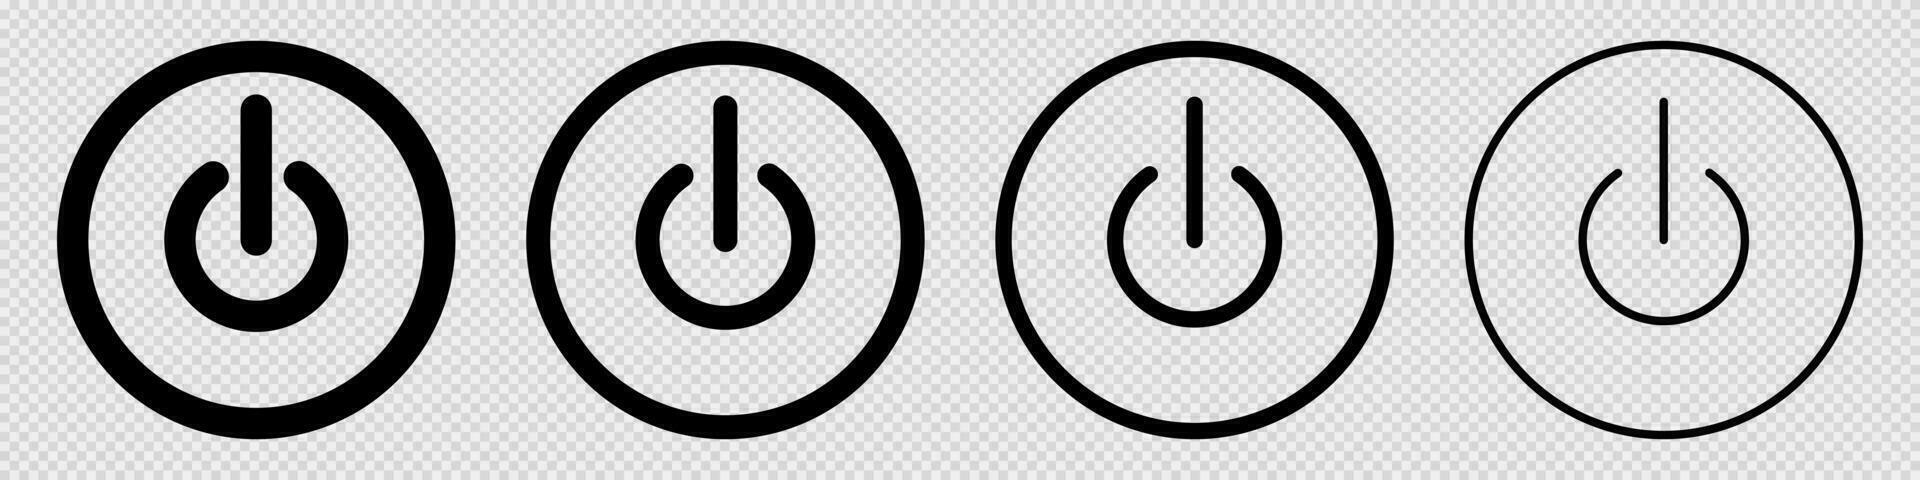 Outline power button. Isolated start and stop symbol on transparent background. Bold and thin energy button. Set of power control icons in black. Turn off and on pictogram. Vector EPS 10.